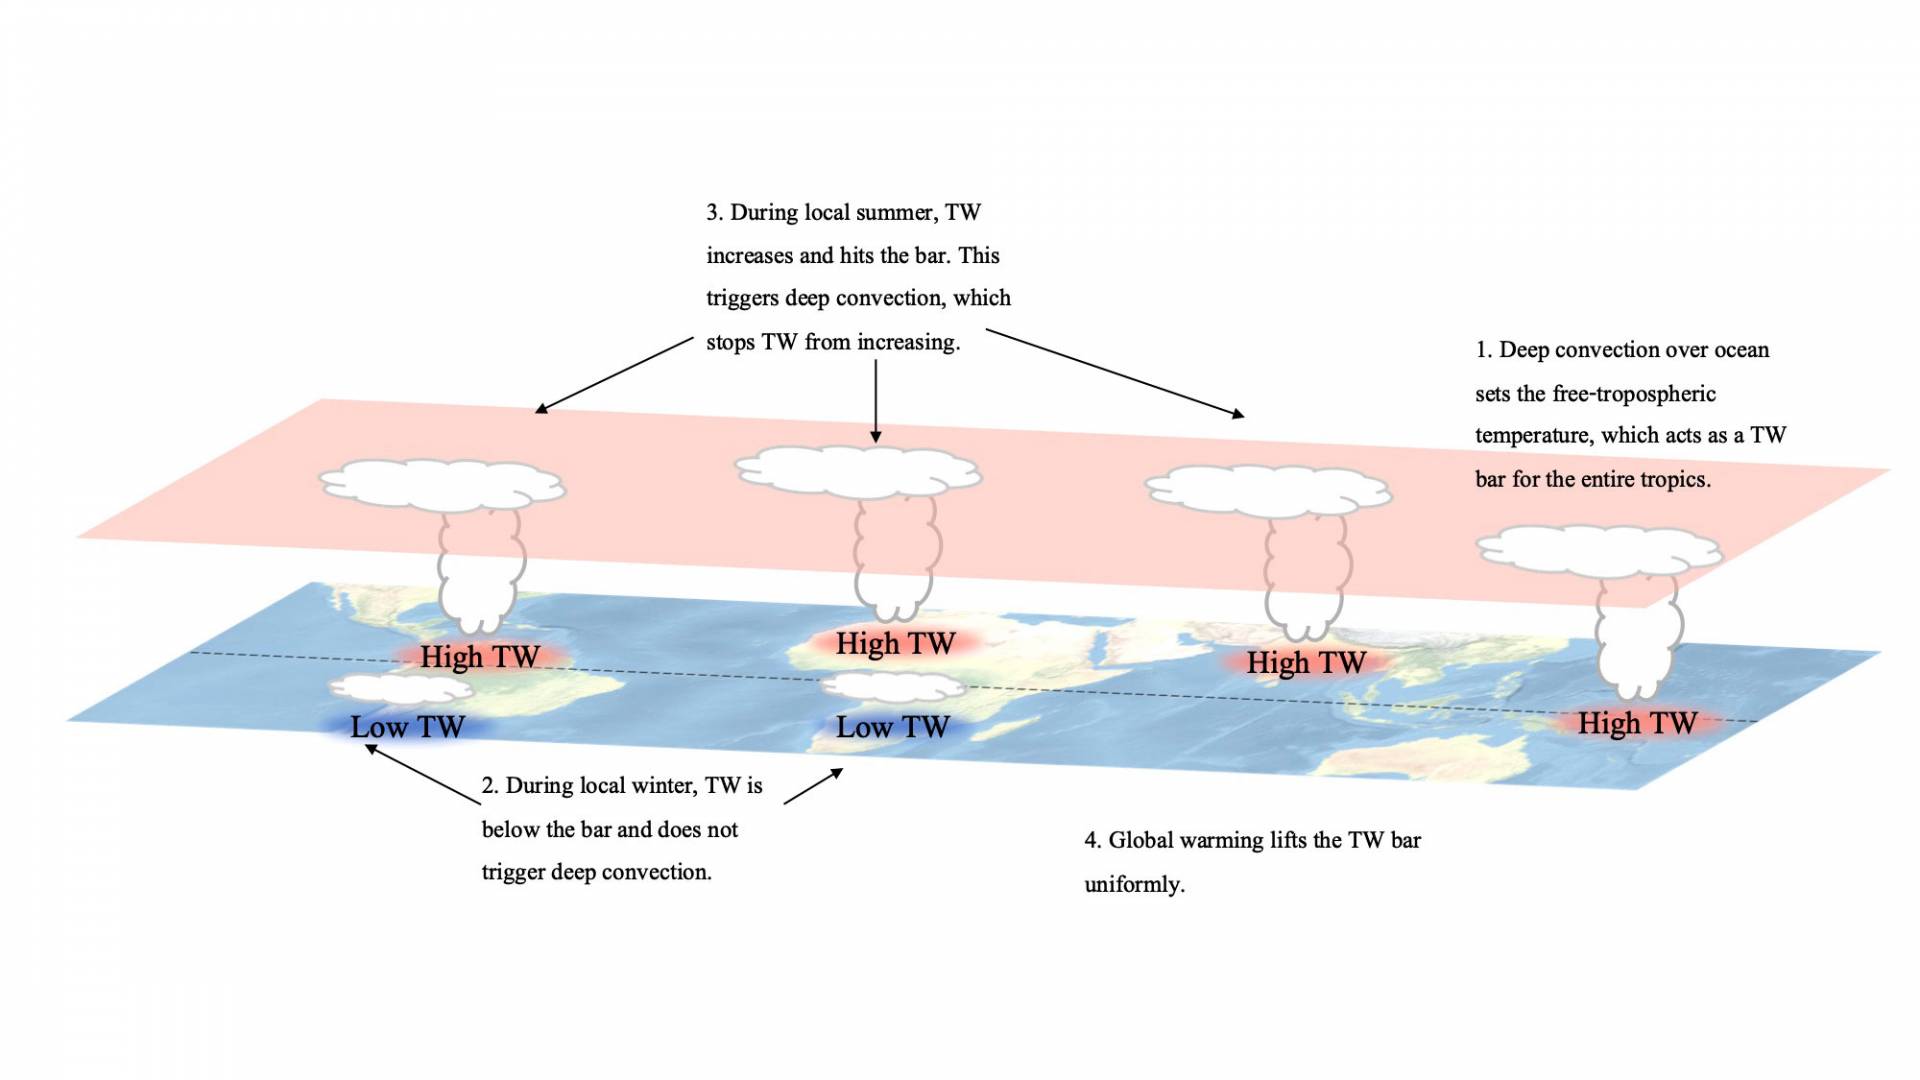 High TW 1. Deep convection over ocean sets the free-topospheric temperature, which acts as a TW bar for the entire tropics. High TW,, low TW 2: During local winter, TW is below the bar and does not trigger deep convection. 3. During local summer, TW increases and hits the bar. This triggers deep convecion, which stops TW from increasing. 4. Global warming lifts the TW bar uniformly.